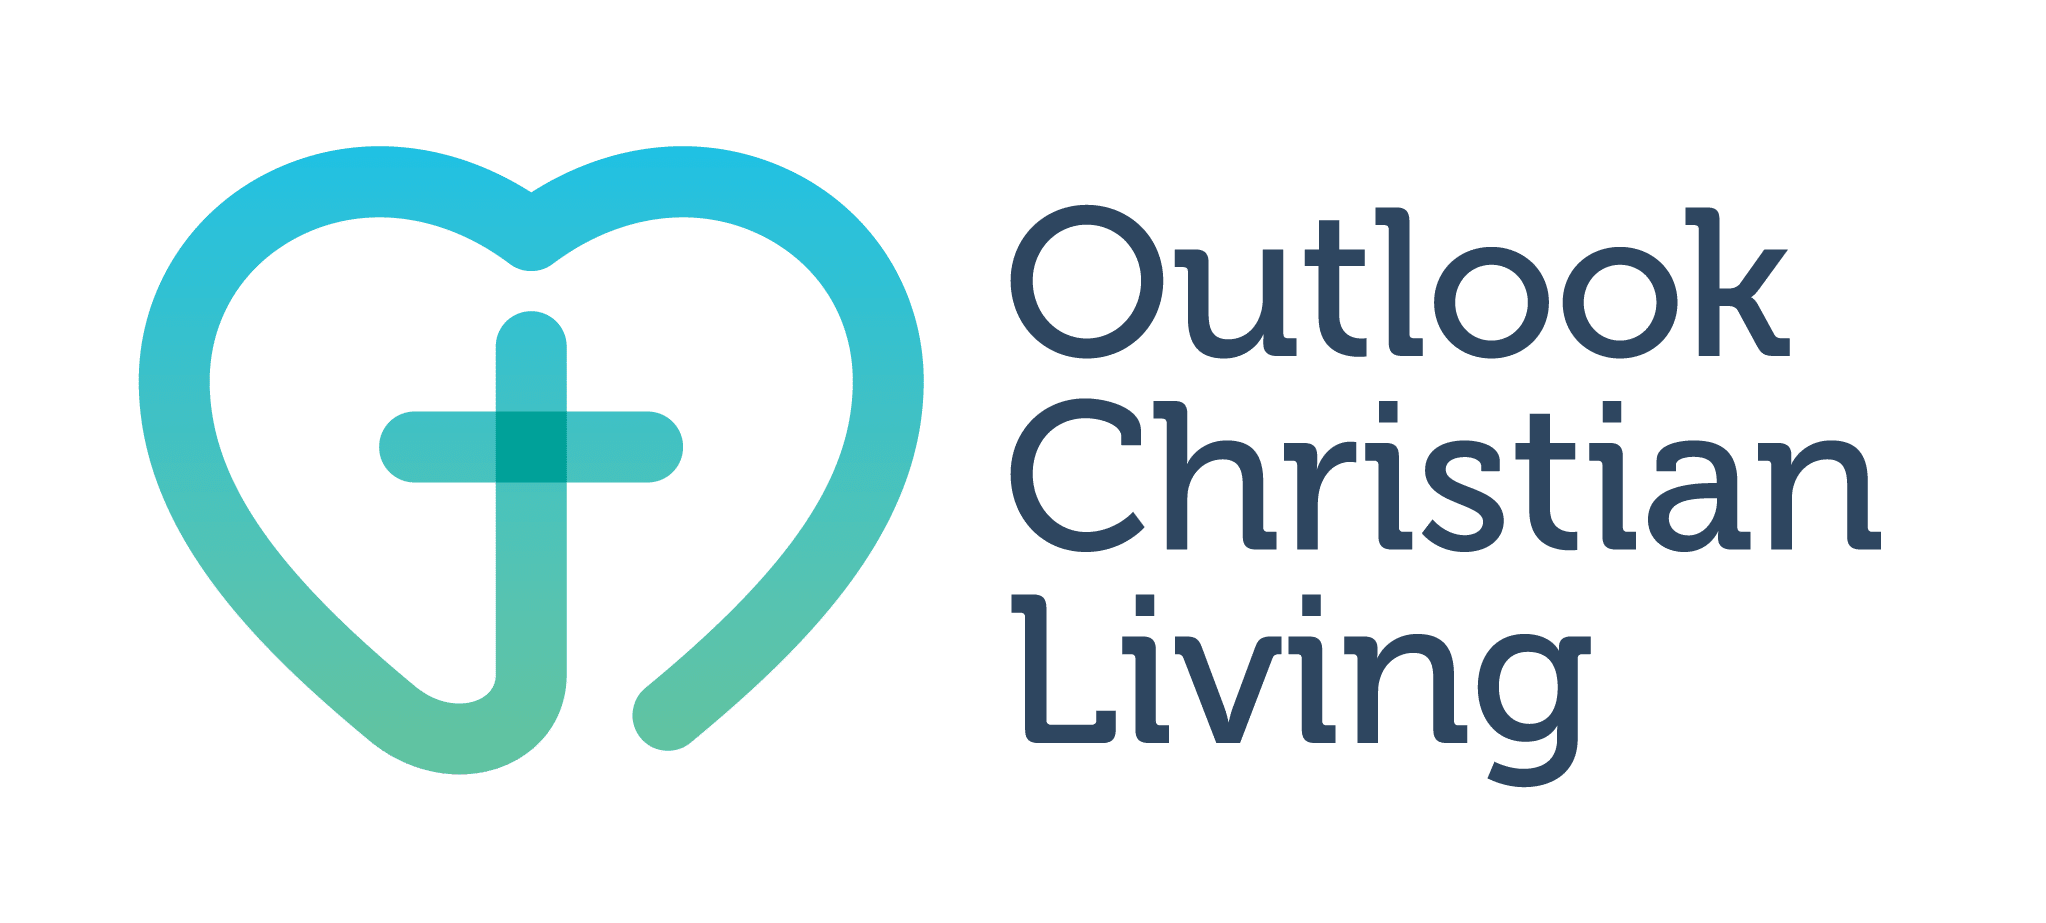 Outlook Christian Living logo featuring a heart with a cross inside, symbolizing faith-based care for the ageing community. The text "Outlook Christian Living" is displayed in bold white letters against a black background, with a blue circle and letter "C" adding creativity to the design. SCS Group supports Outlook Christian Living in their mission to nurture spiritually-inspired communities.